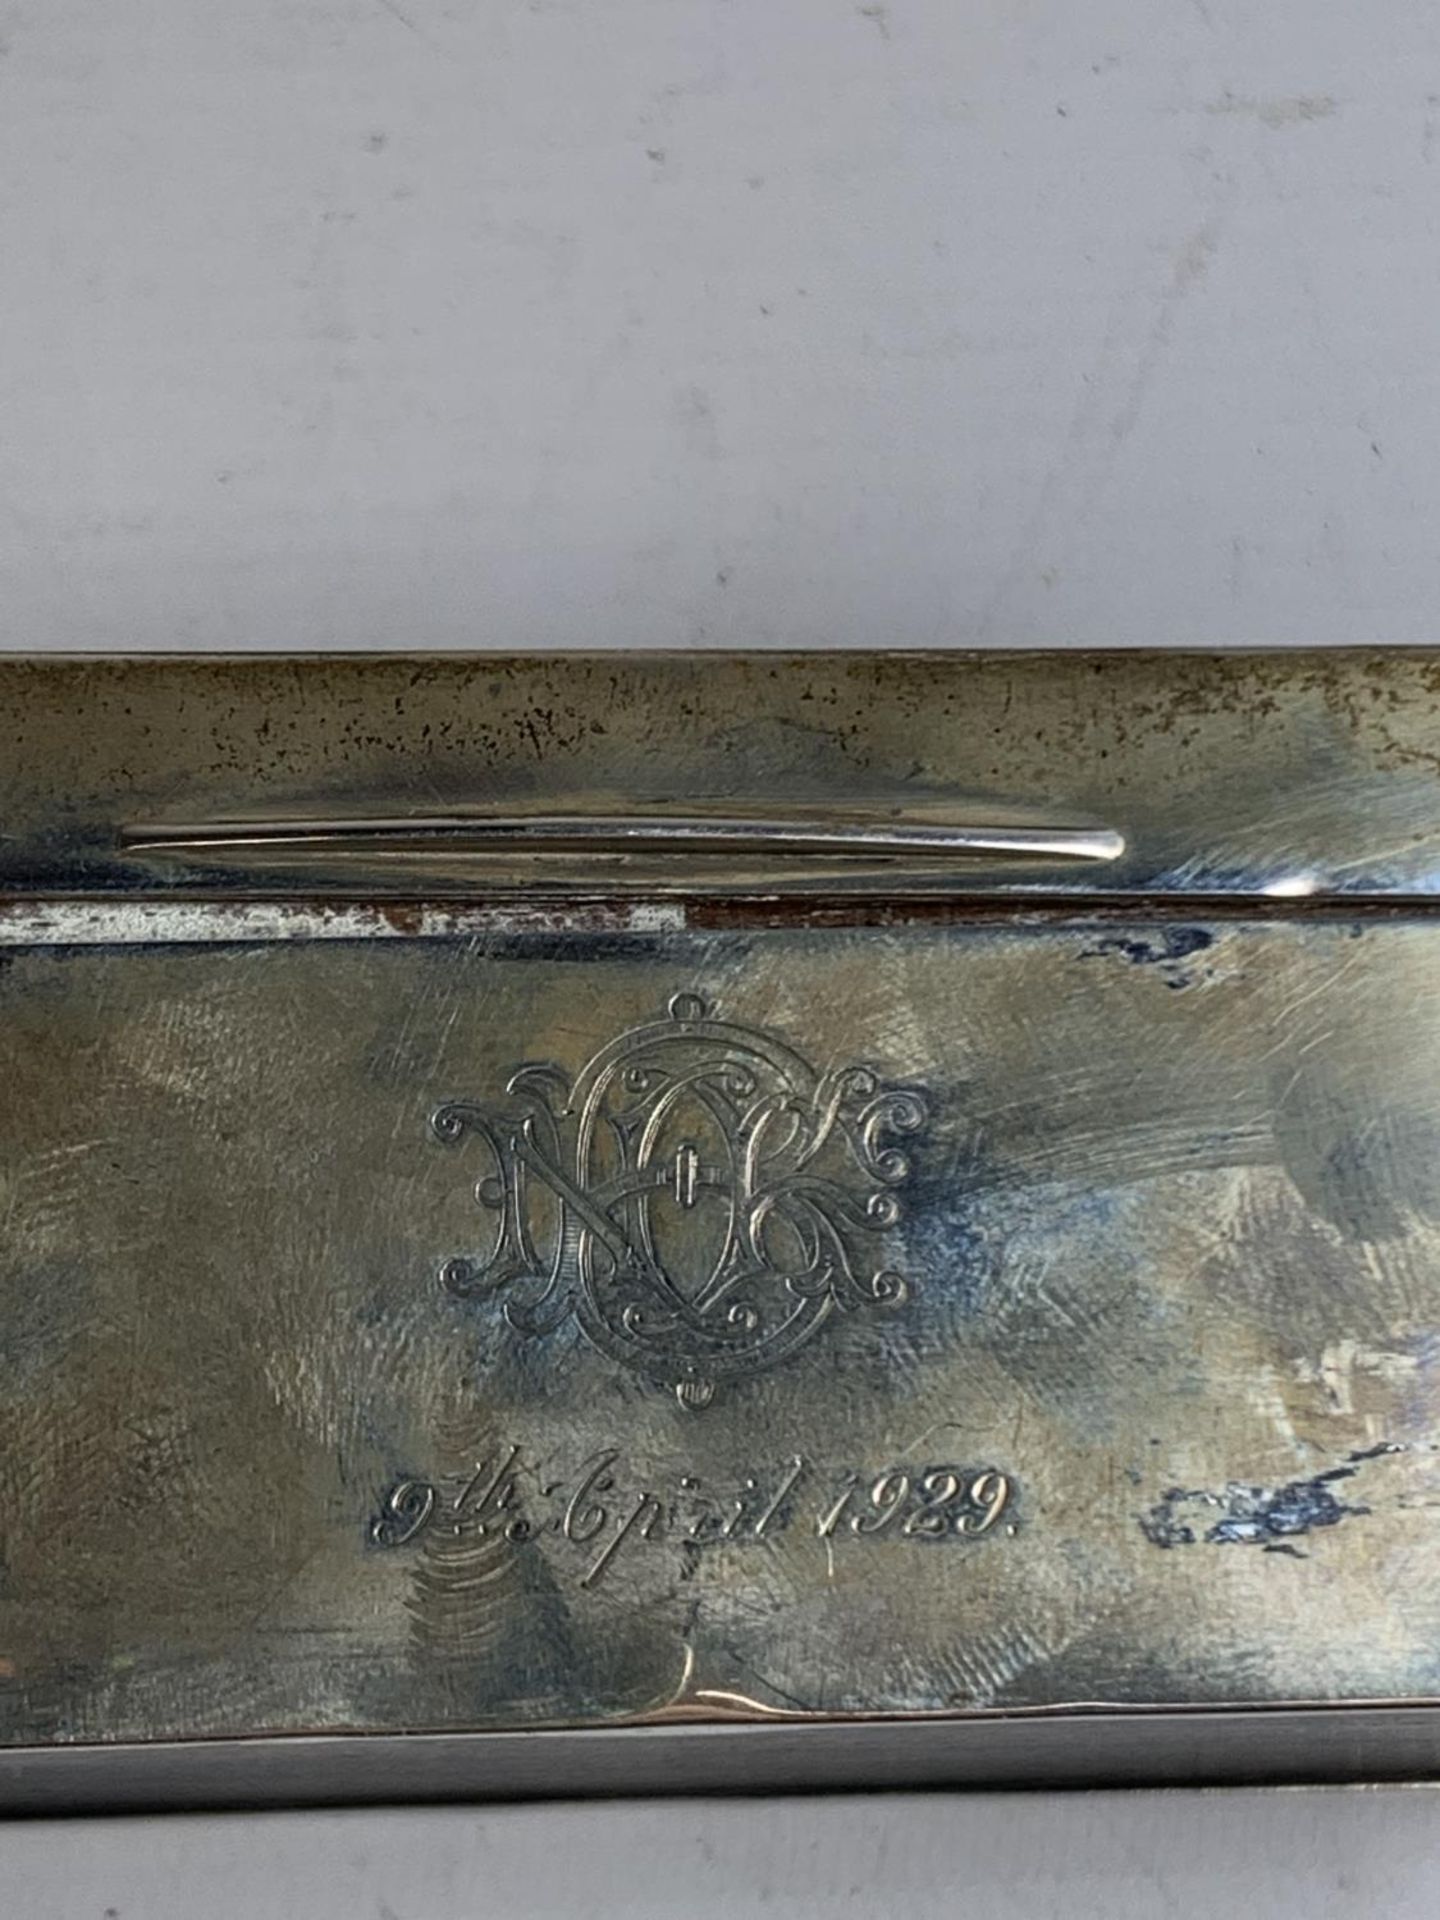 A HALLMARKED BIRMINGHAM SILVER BOX ENGRAVED 9TH APRIL 1929 GROSS WEIGHT 362 GRAMS - Image 2 of 4